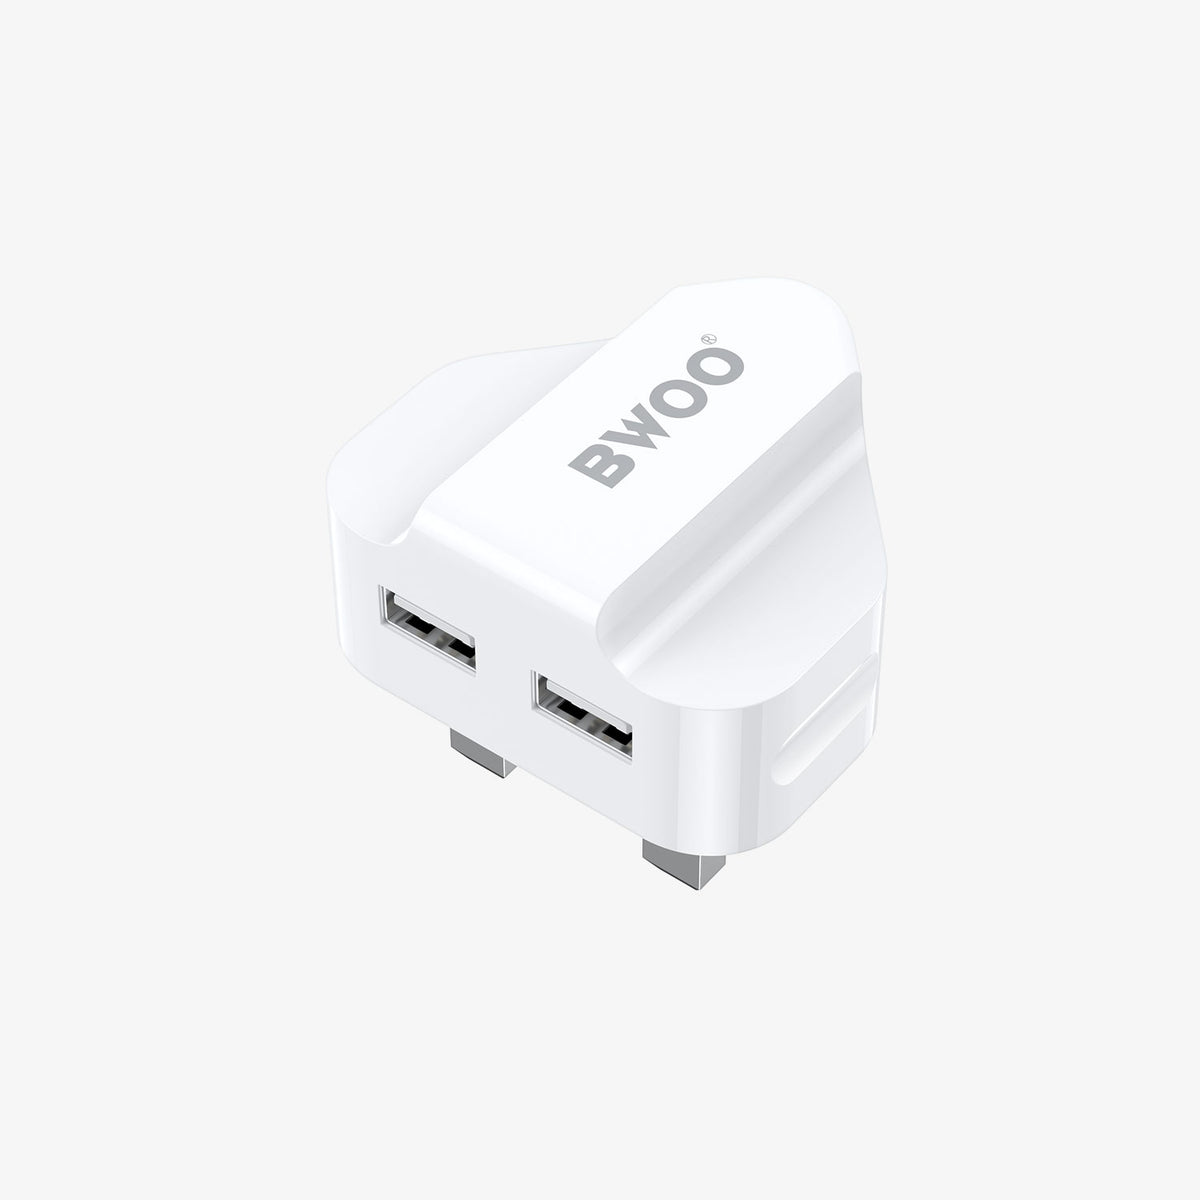 BWOO 2.1A Fast Charging Dual USB Ports Wall Charger